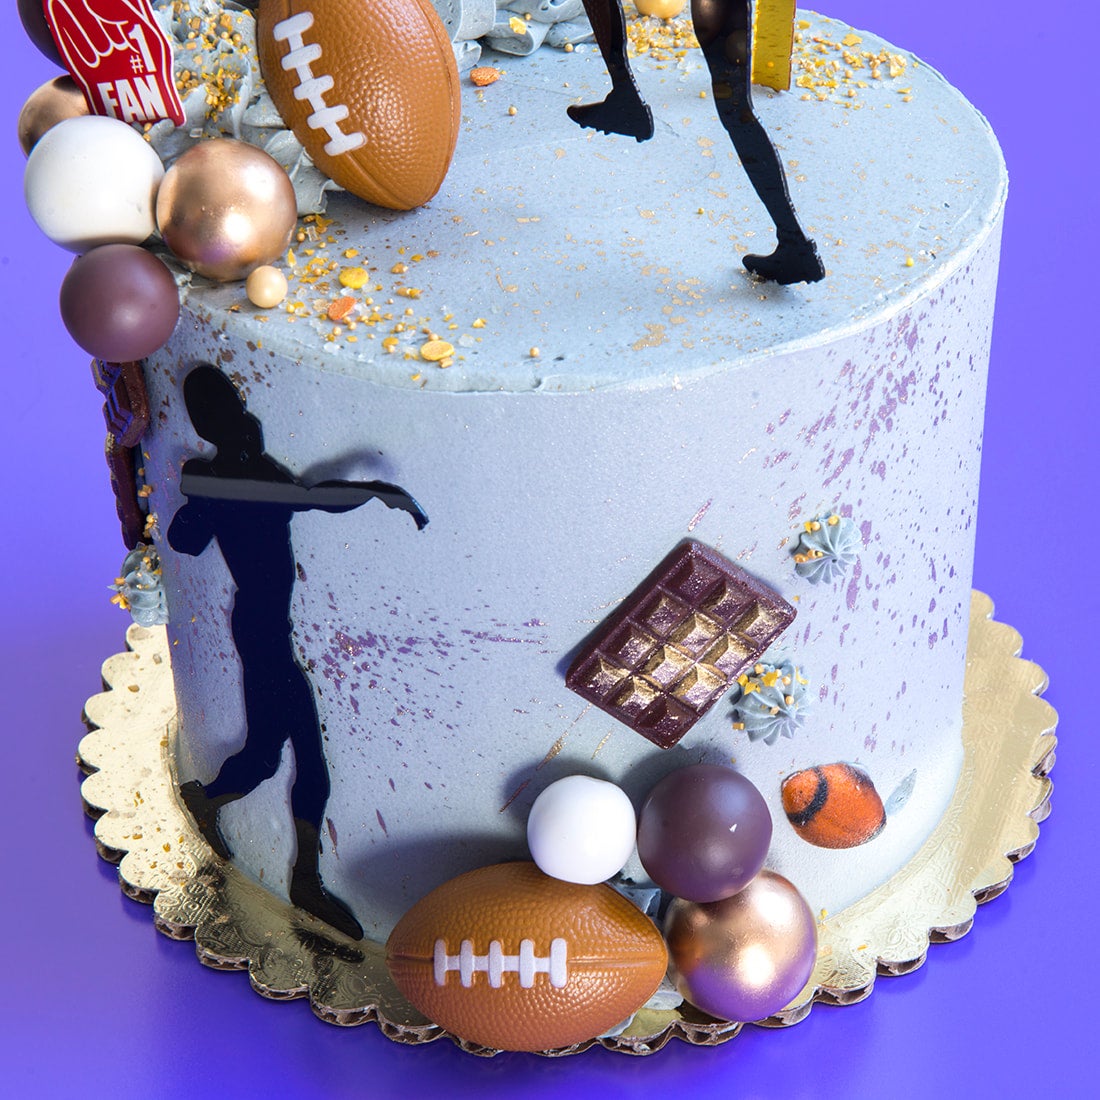 Crafty Cakes | Exeter | UK - Half Football in Grass Cake